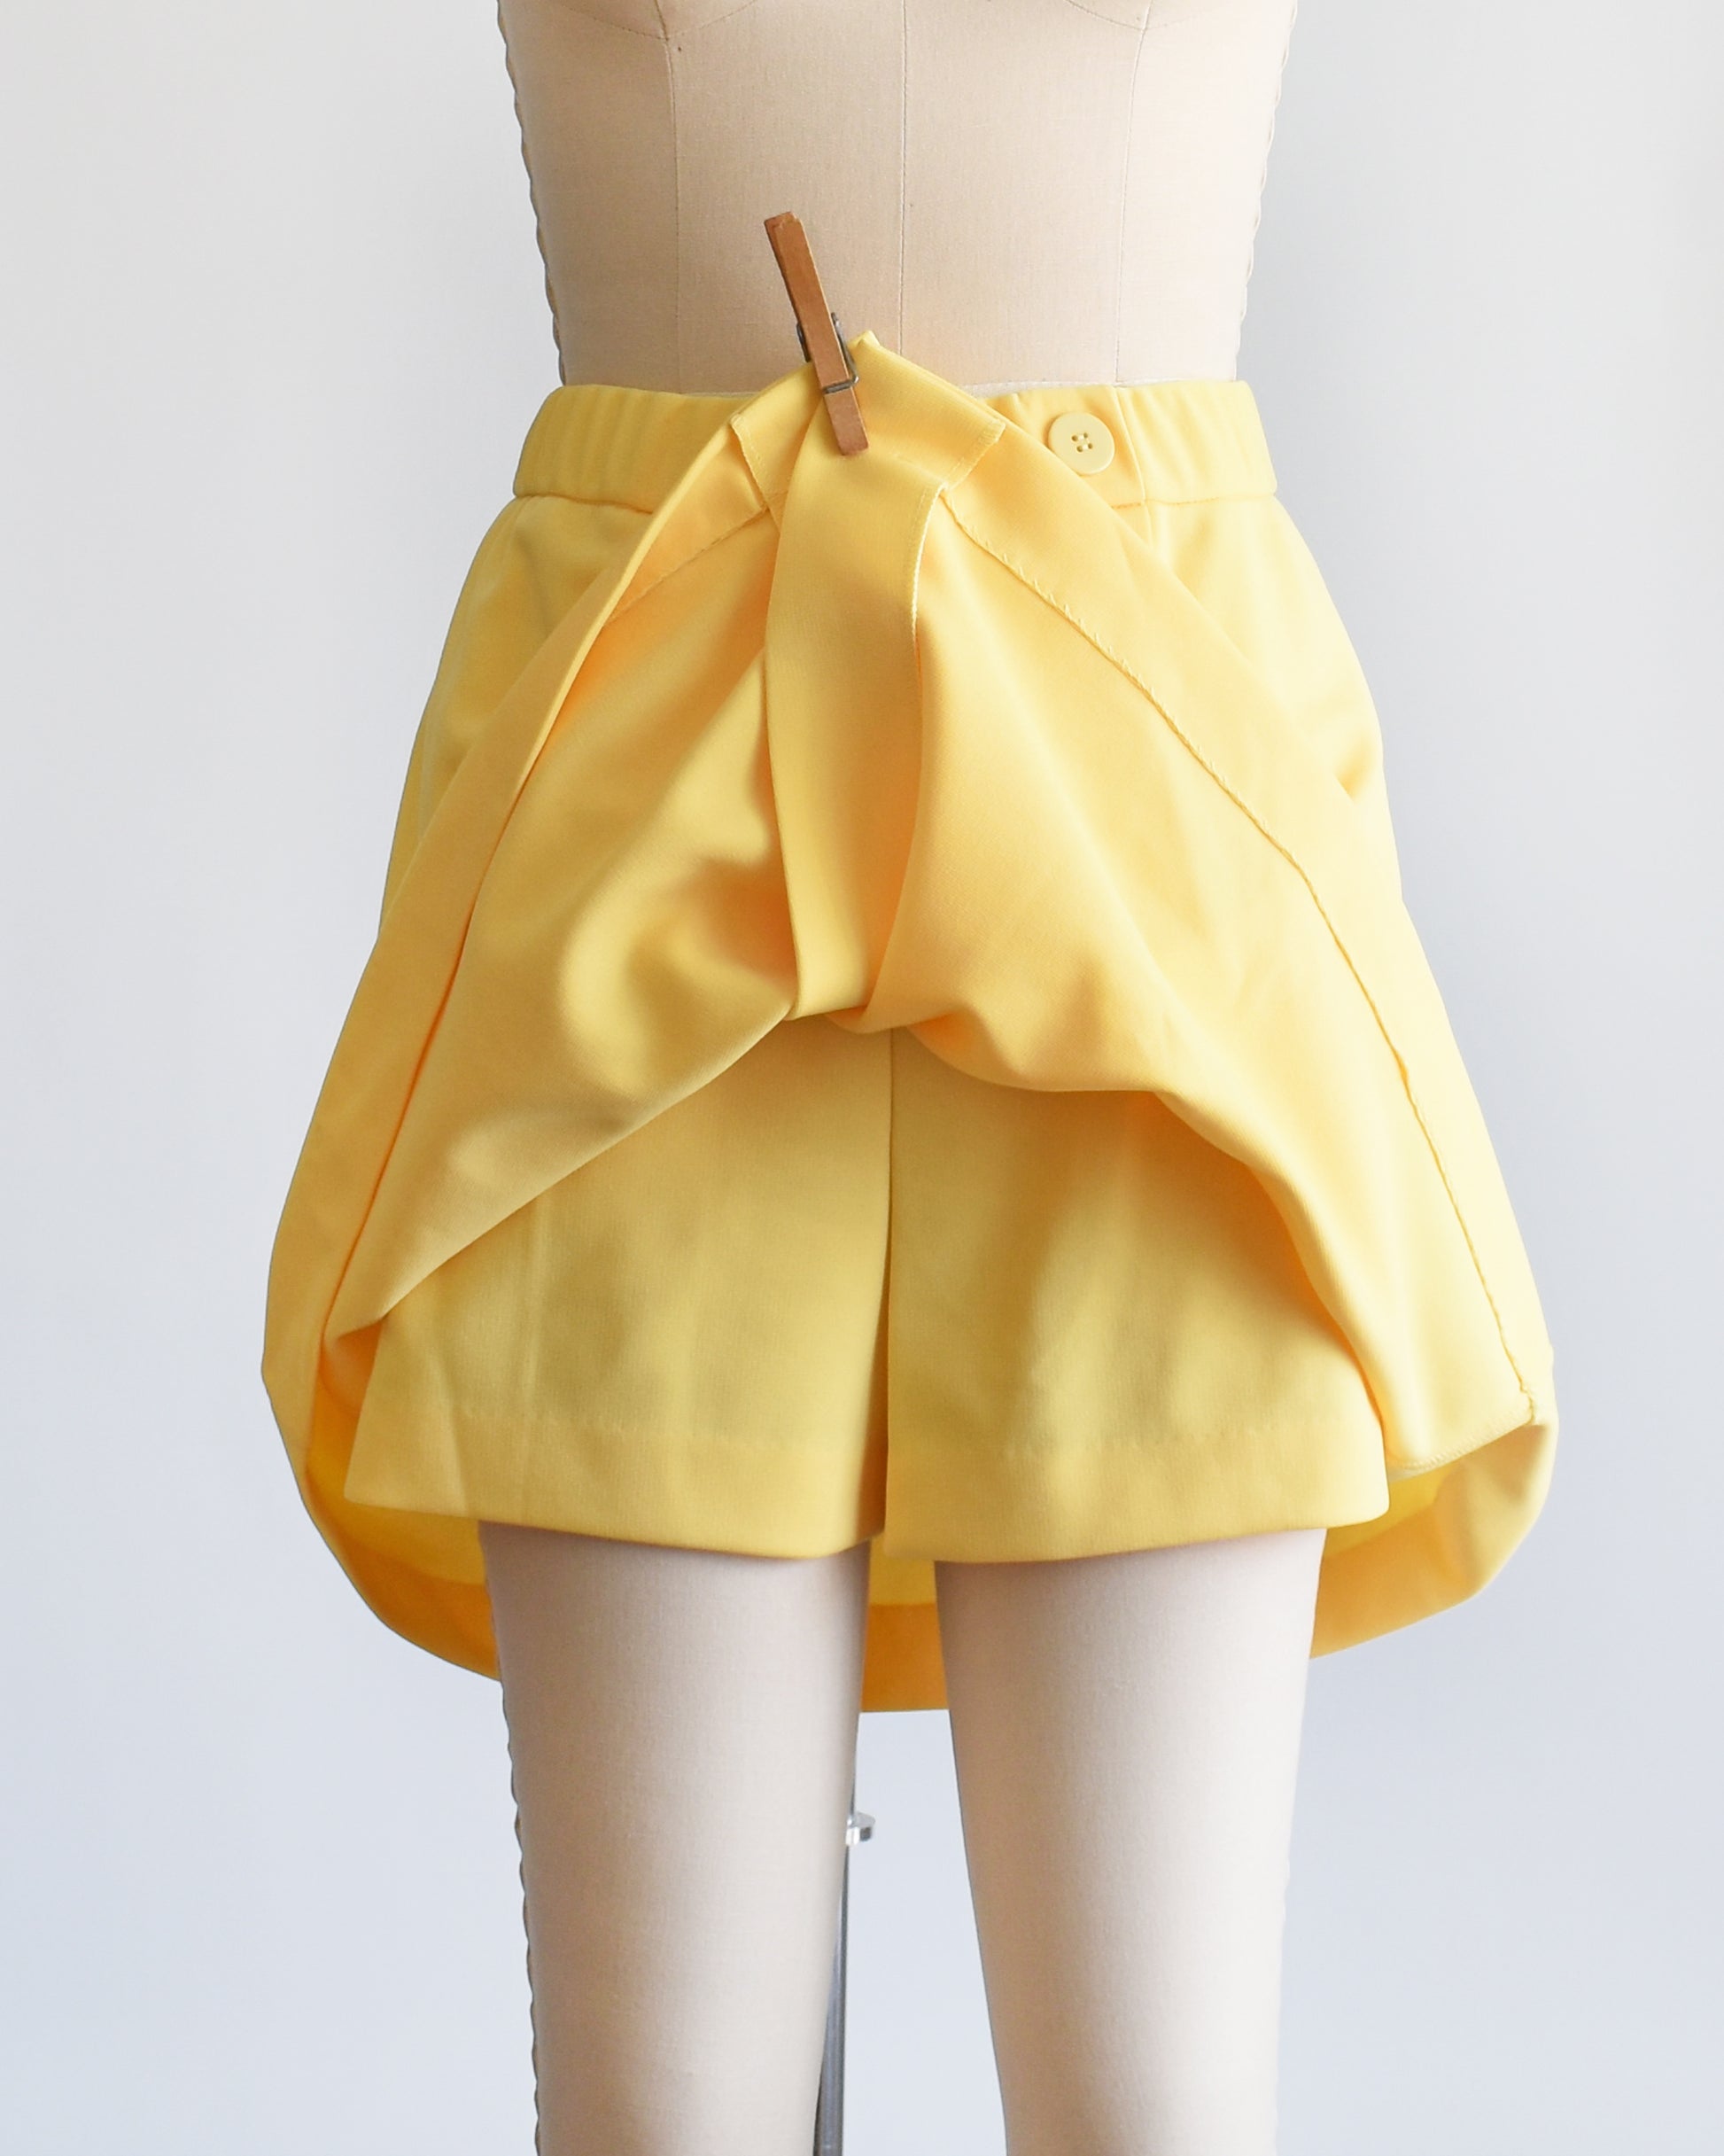 a vintage 1970s skort, with the front pinned showing the matching shorts underneath